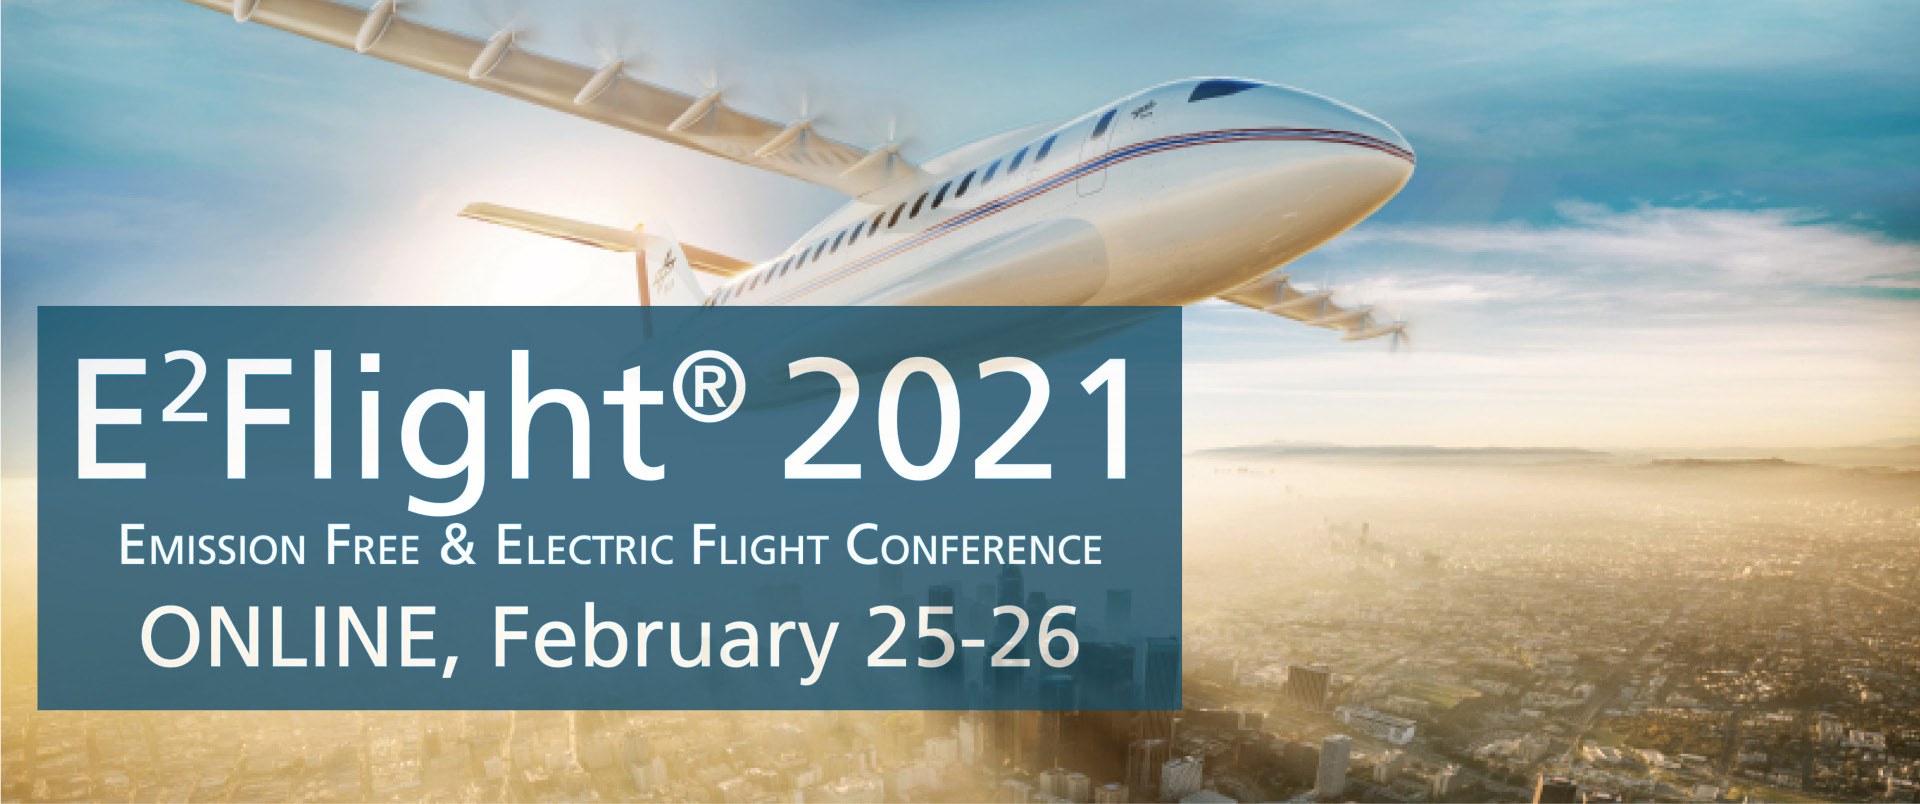 E2Flight 2021 will take place virtually, with presentations on environment-friendly flight